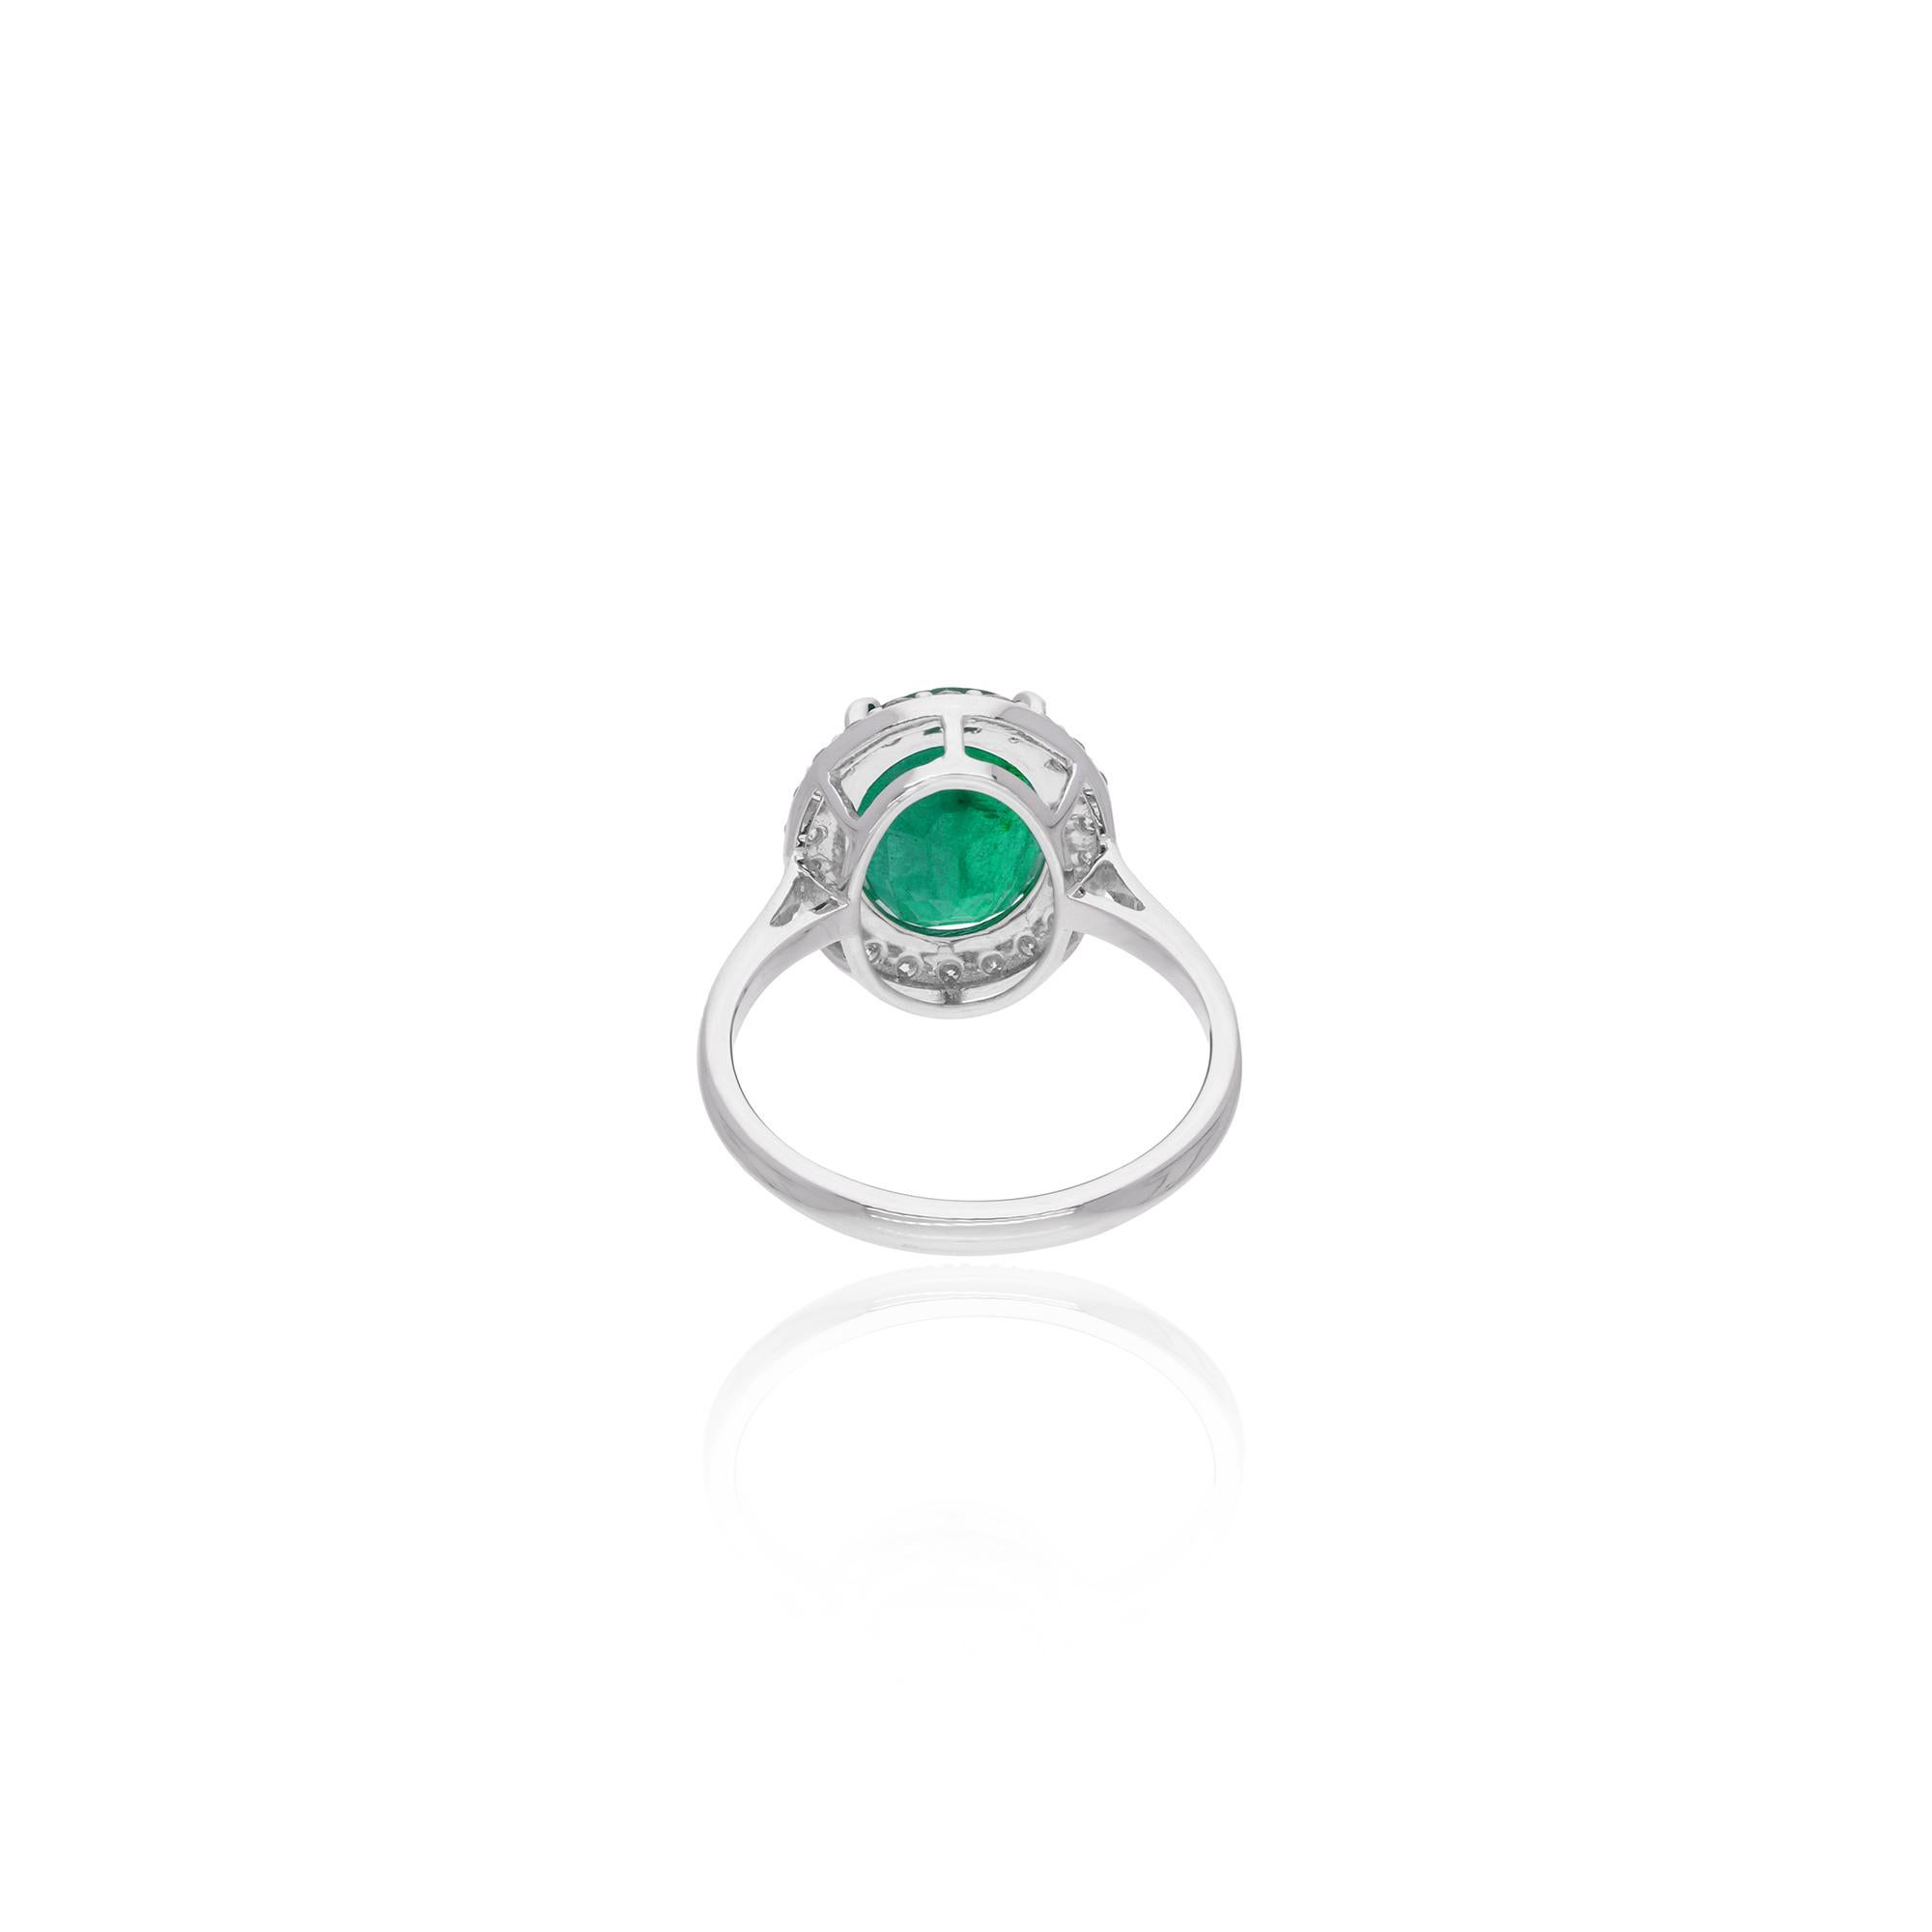 Handcrafted with care and precision, this ring features a stunning 3.33 ct. Oval Zambian Emerald at its center, surrounded by a dazzling halo of 0.4 ct. of Round Diamonds. This ring is available in 10k/14k/18k, Rose Gold/White Gold/Yellow